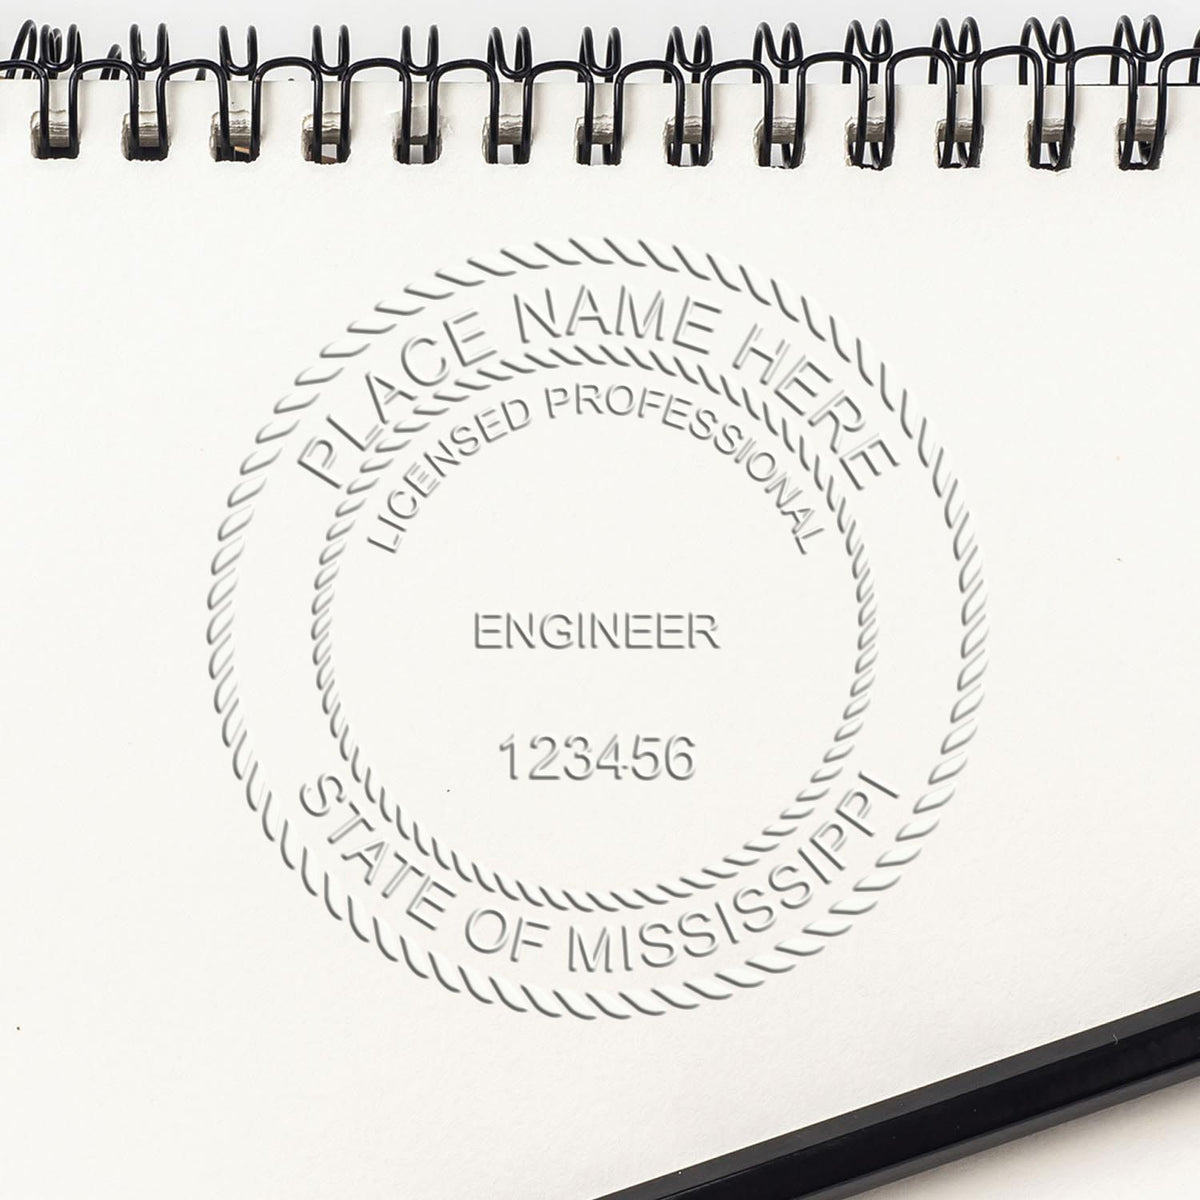 The State of Mississippi Extended Long Reach Engineer Seal stamp impression comes to life with a crisp, detailed photo on paper - showcasing true professional quality.